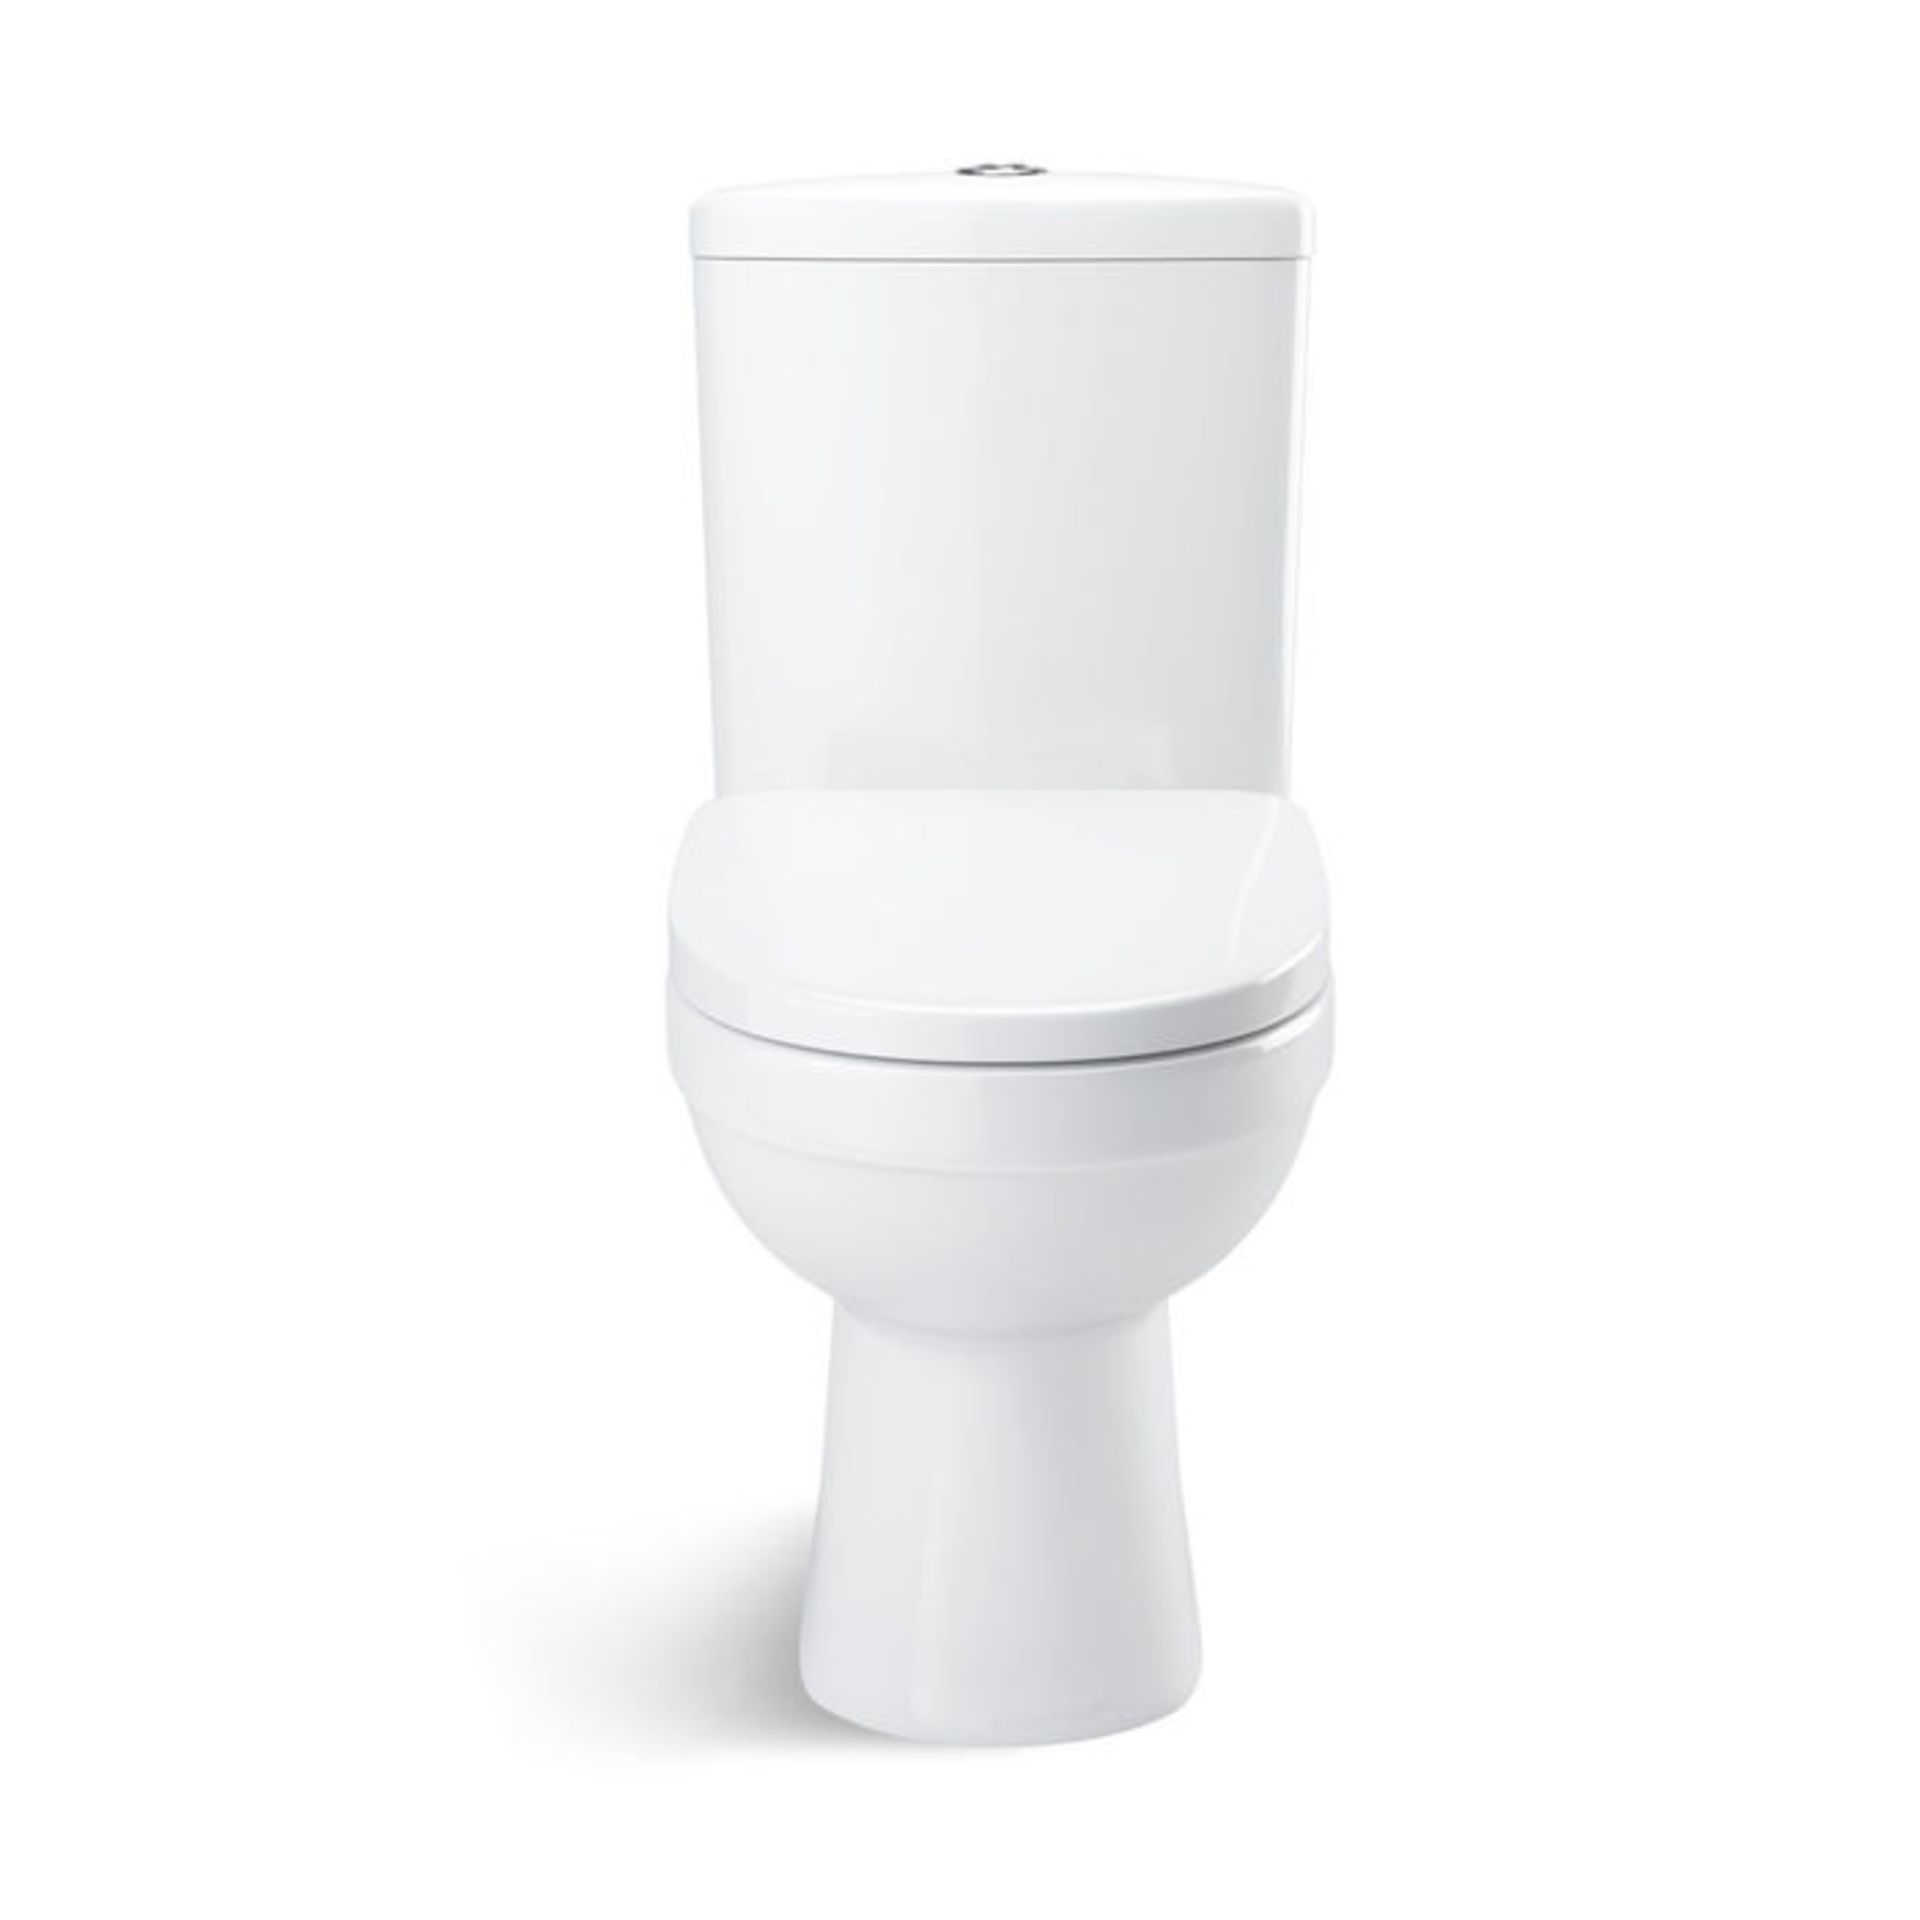 (TA256) Sabrosa II Close Coupled Toilet & Cistern inc Soft Close Seat. Made from White Vitreous - Image 3 of 4